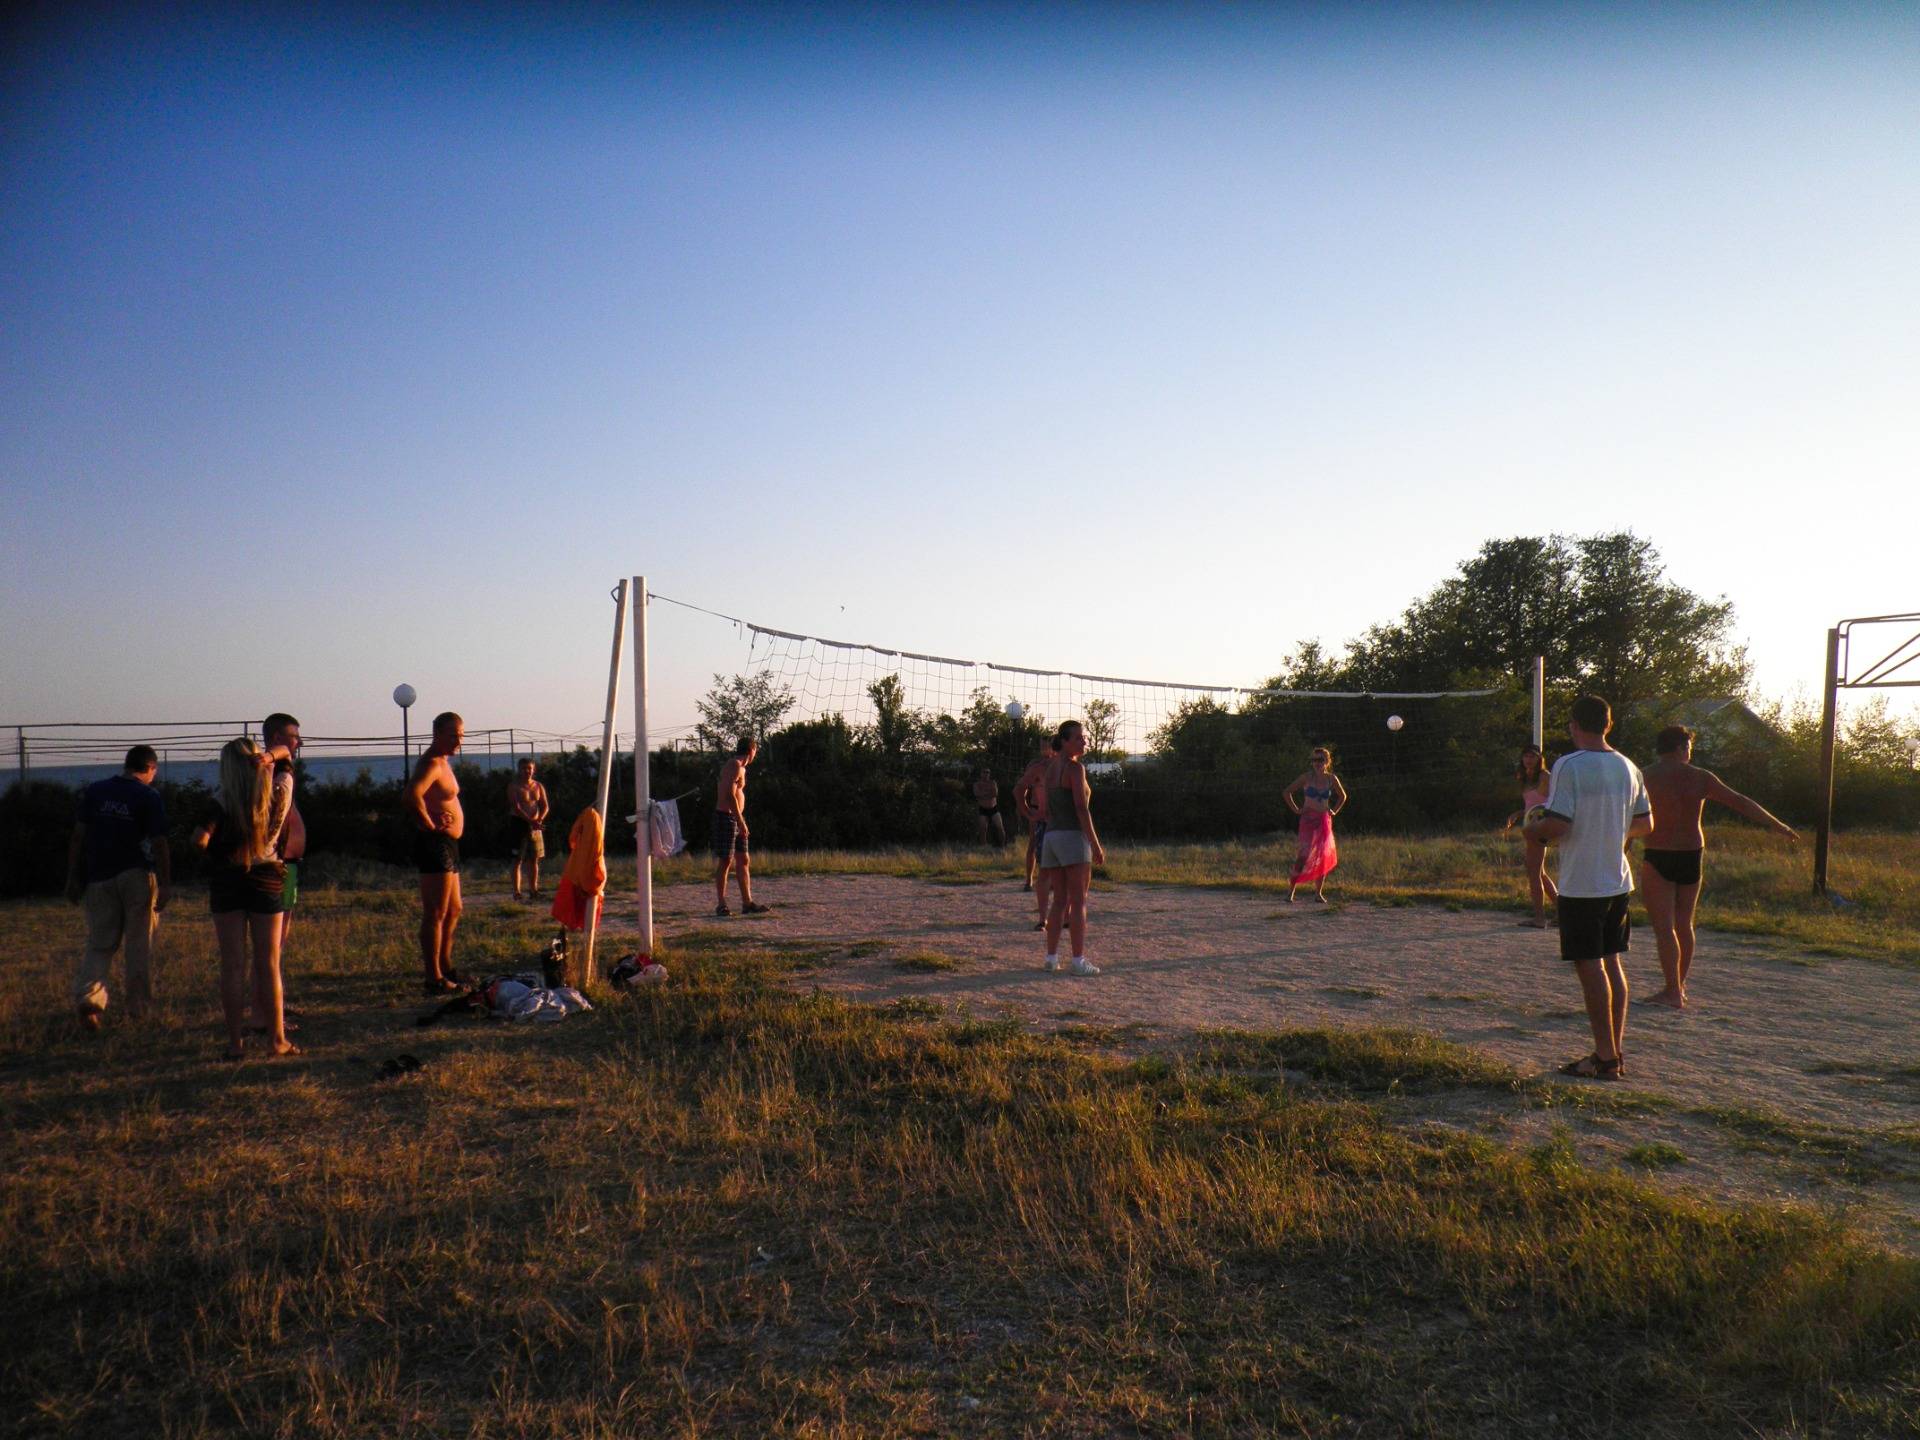 Evening volleyball game